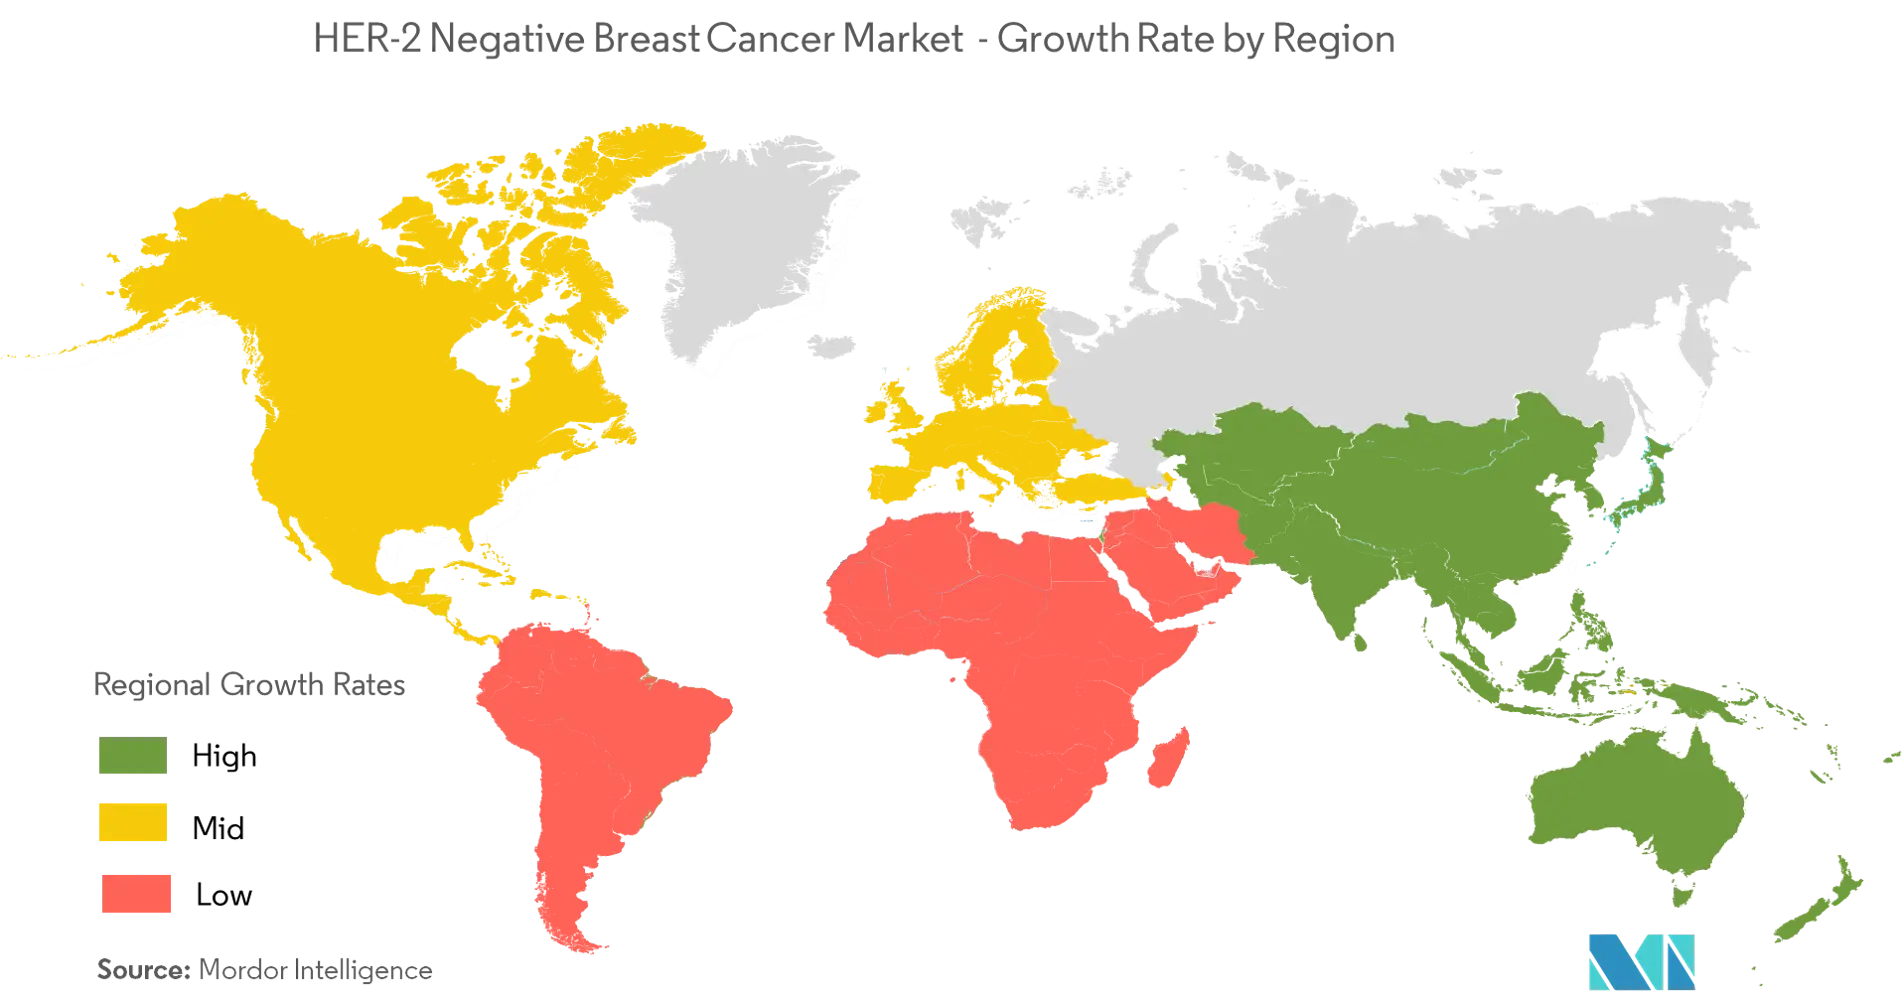 HER-2 Negative Breast Cancer Market Growth